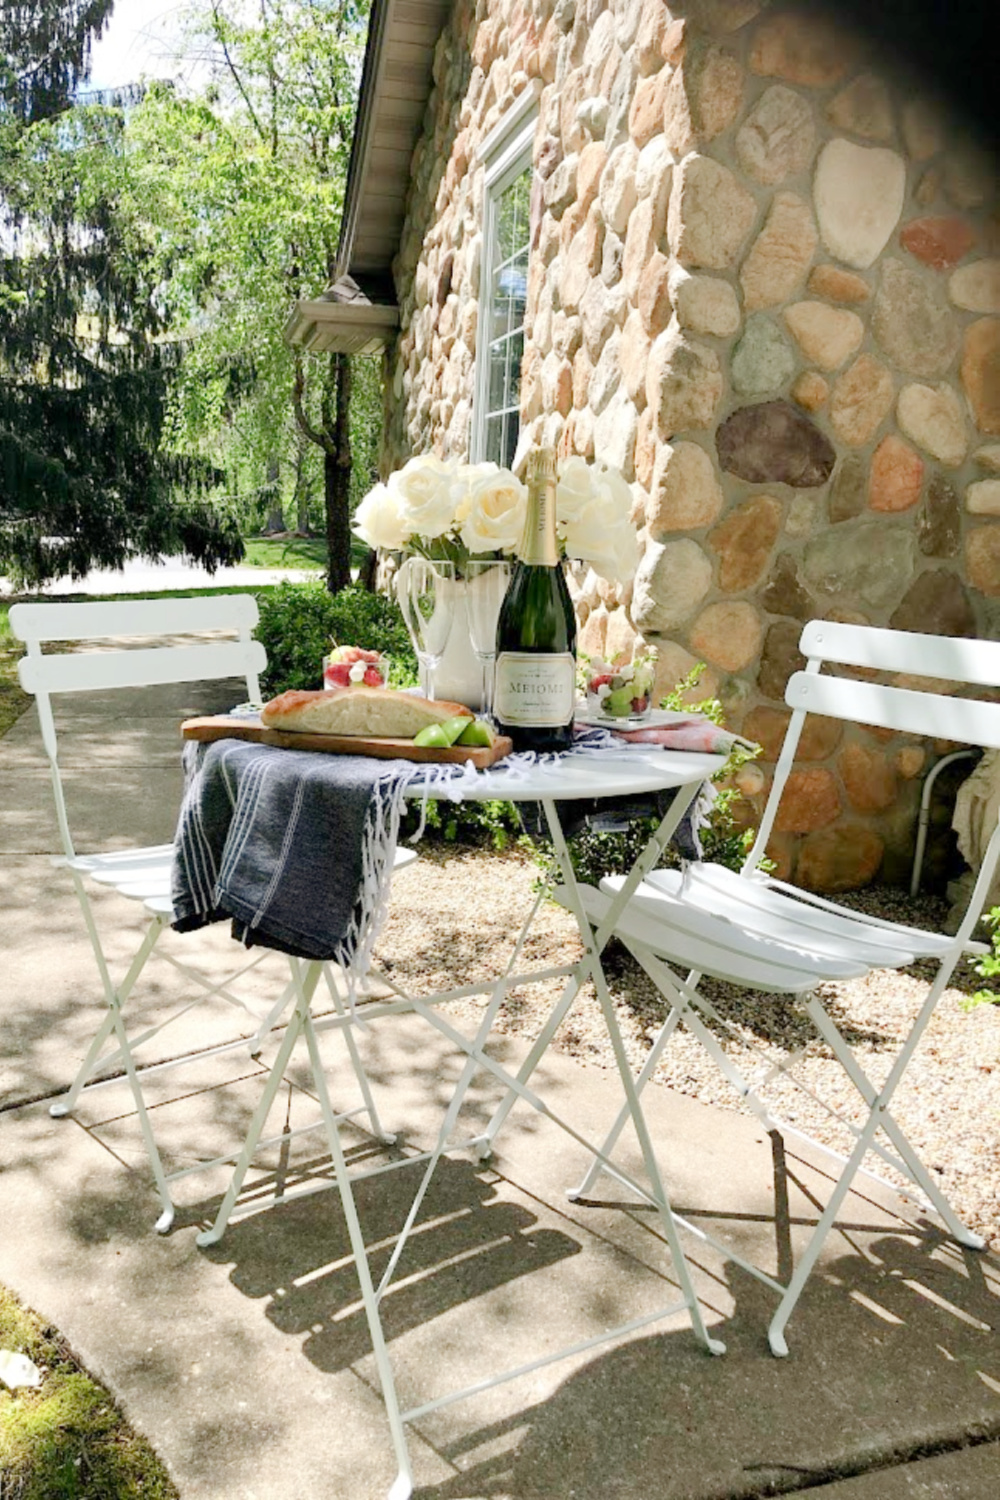 Rustic French country cafe dining in the garden with white roses on the table - Hello Lovely Studio. #frenchcafe #frenchcountry #bistroset #cafeset